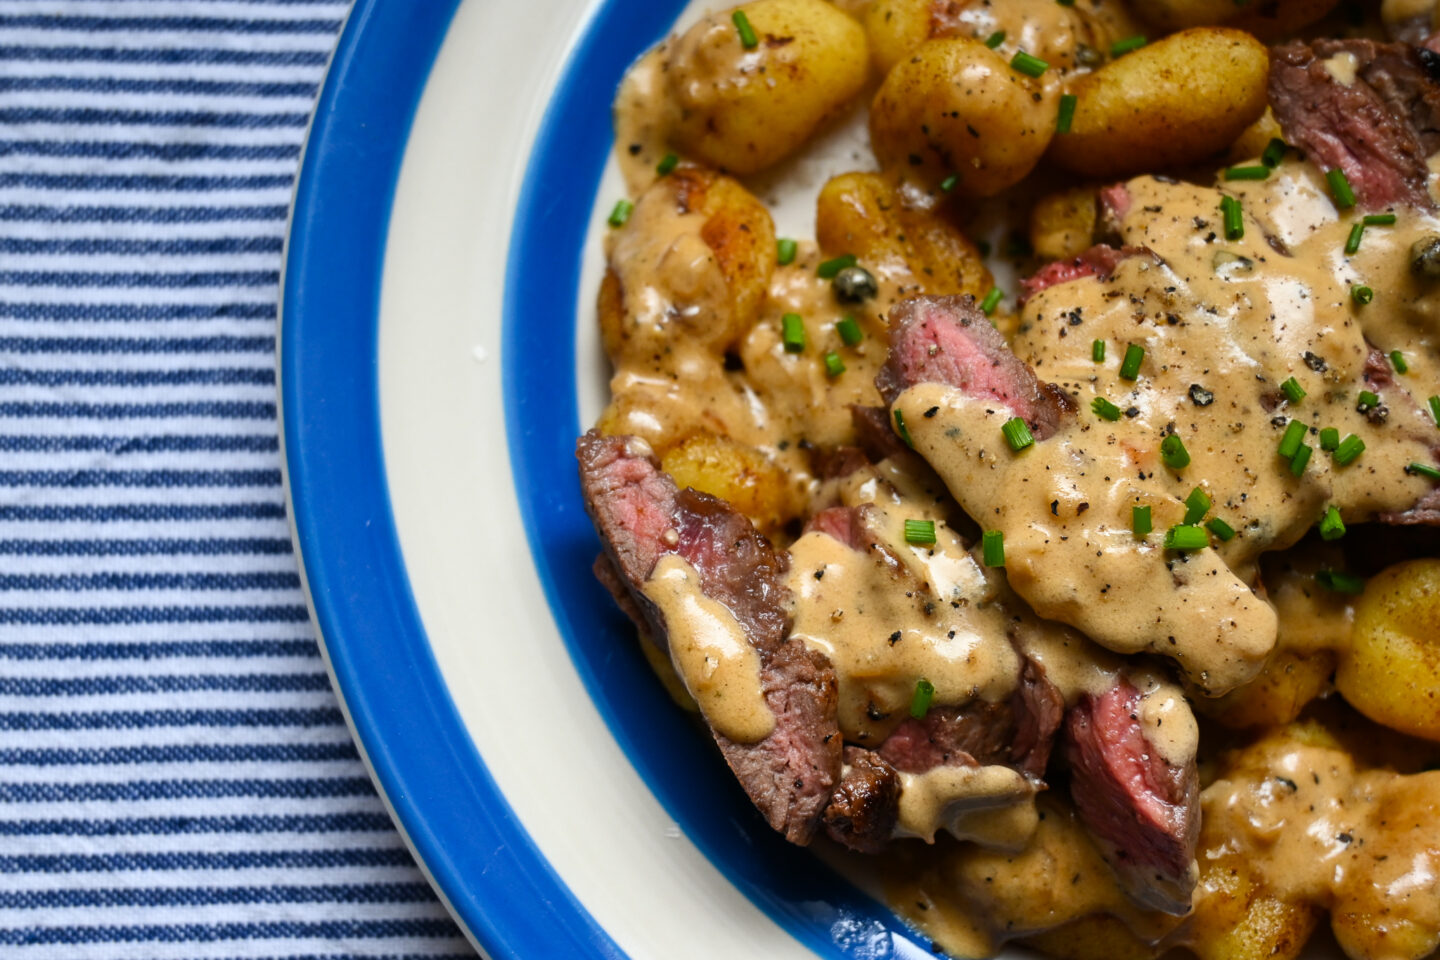 Close-up of fried Gnocchi with sliced medium-rare rump steak across the top drizzled with peppercorn sauce & sprinkled with chopped chives on a blue & white striped plate against a blue & white striped background.